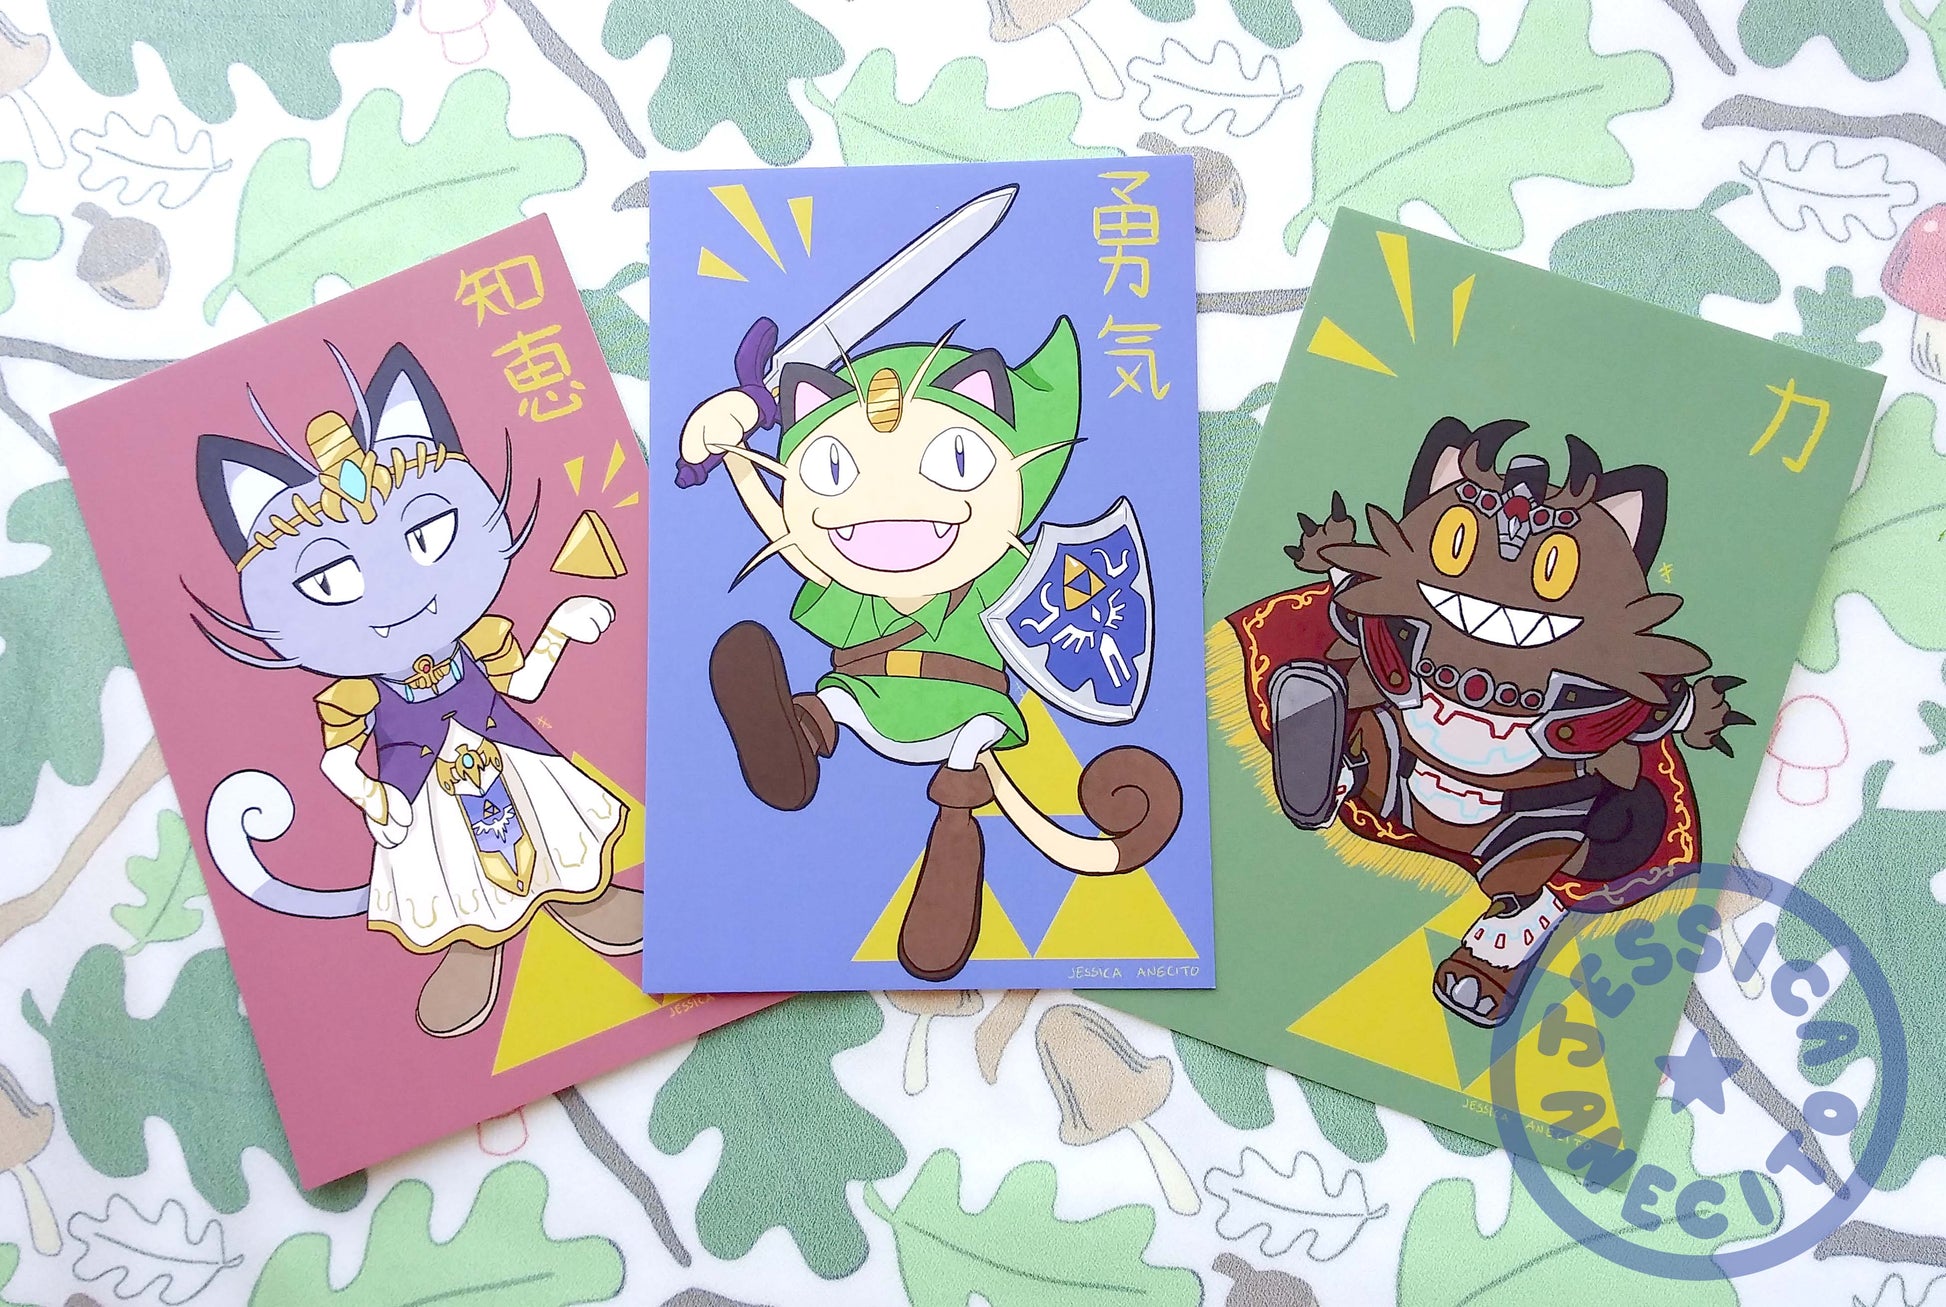 All three available designs of postcard are spread out together on a surface covered in a forest printed cloth. The leftmost print is alolan version Meowth, dressed as Princess Zelda. The middle print is the original design for Meowth, dressed as Link and the rightmost design is the Galarian form of Meowth, dressed as Ganon